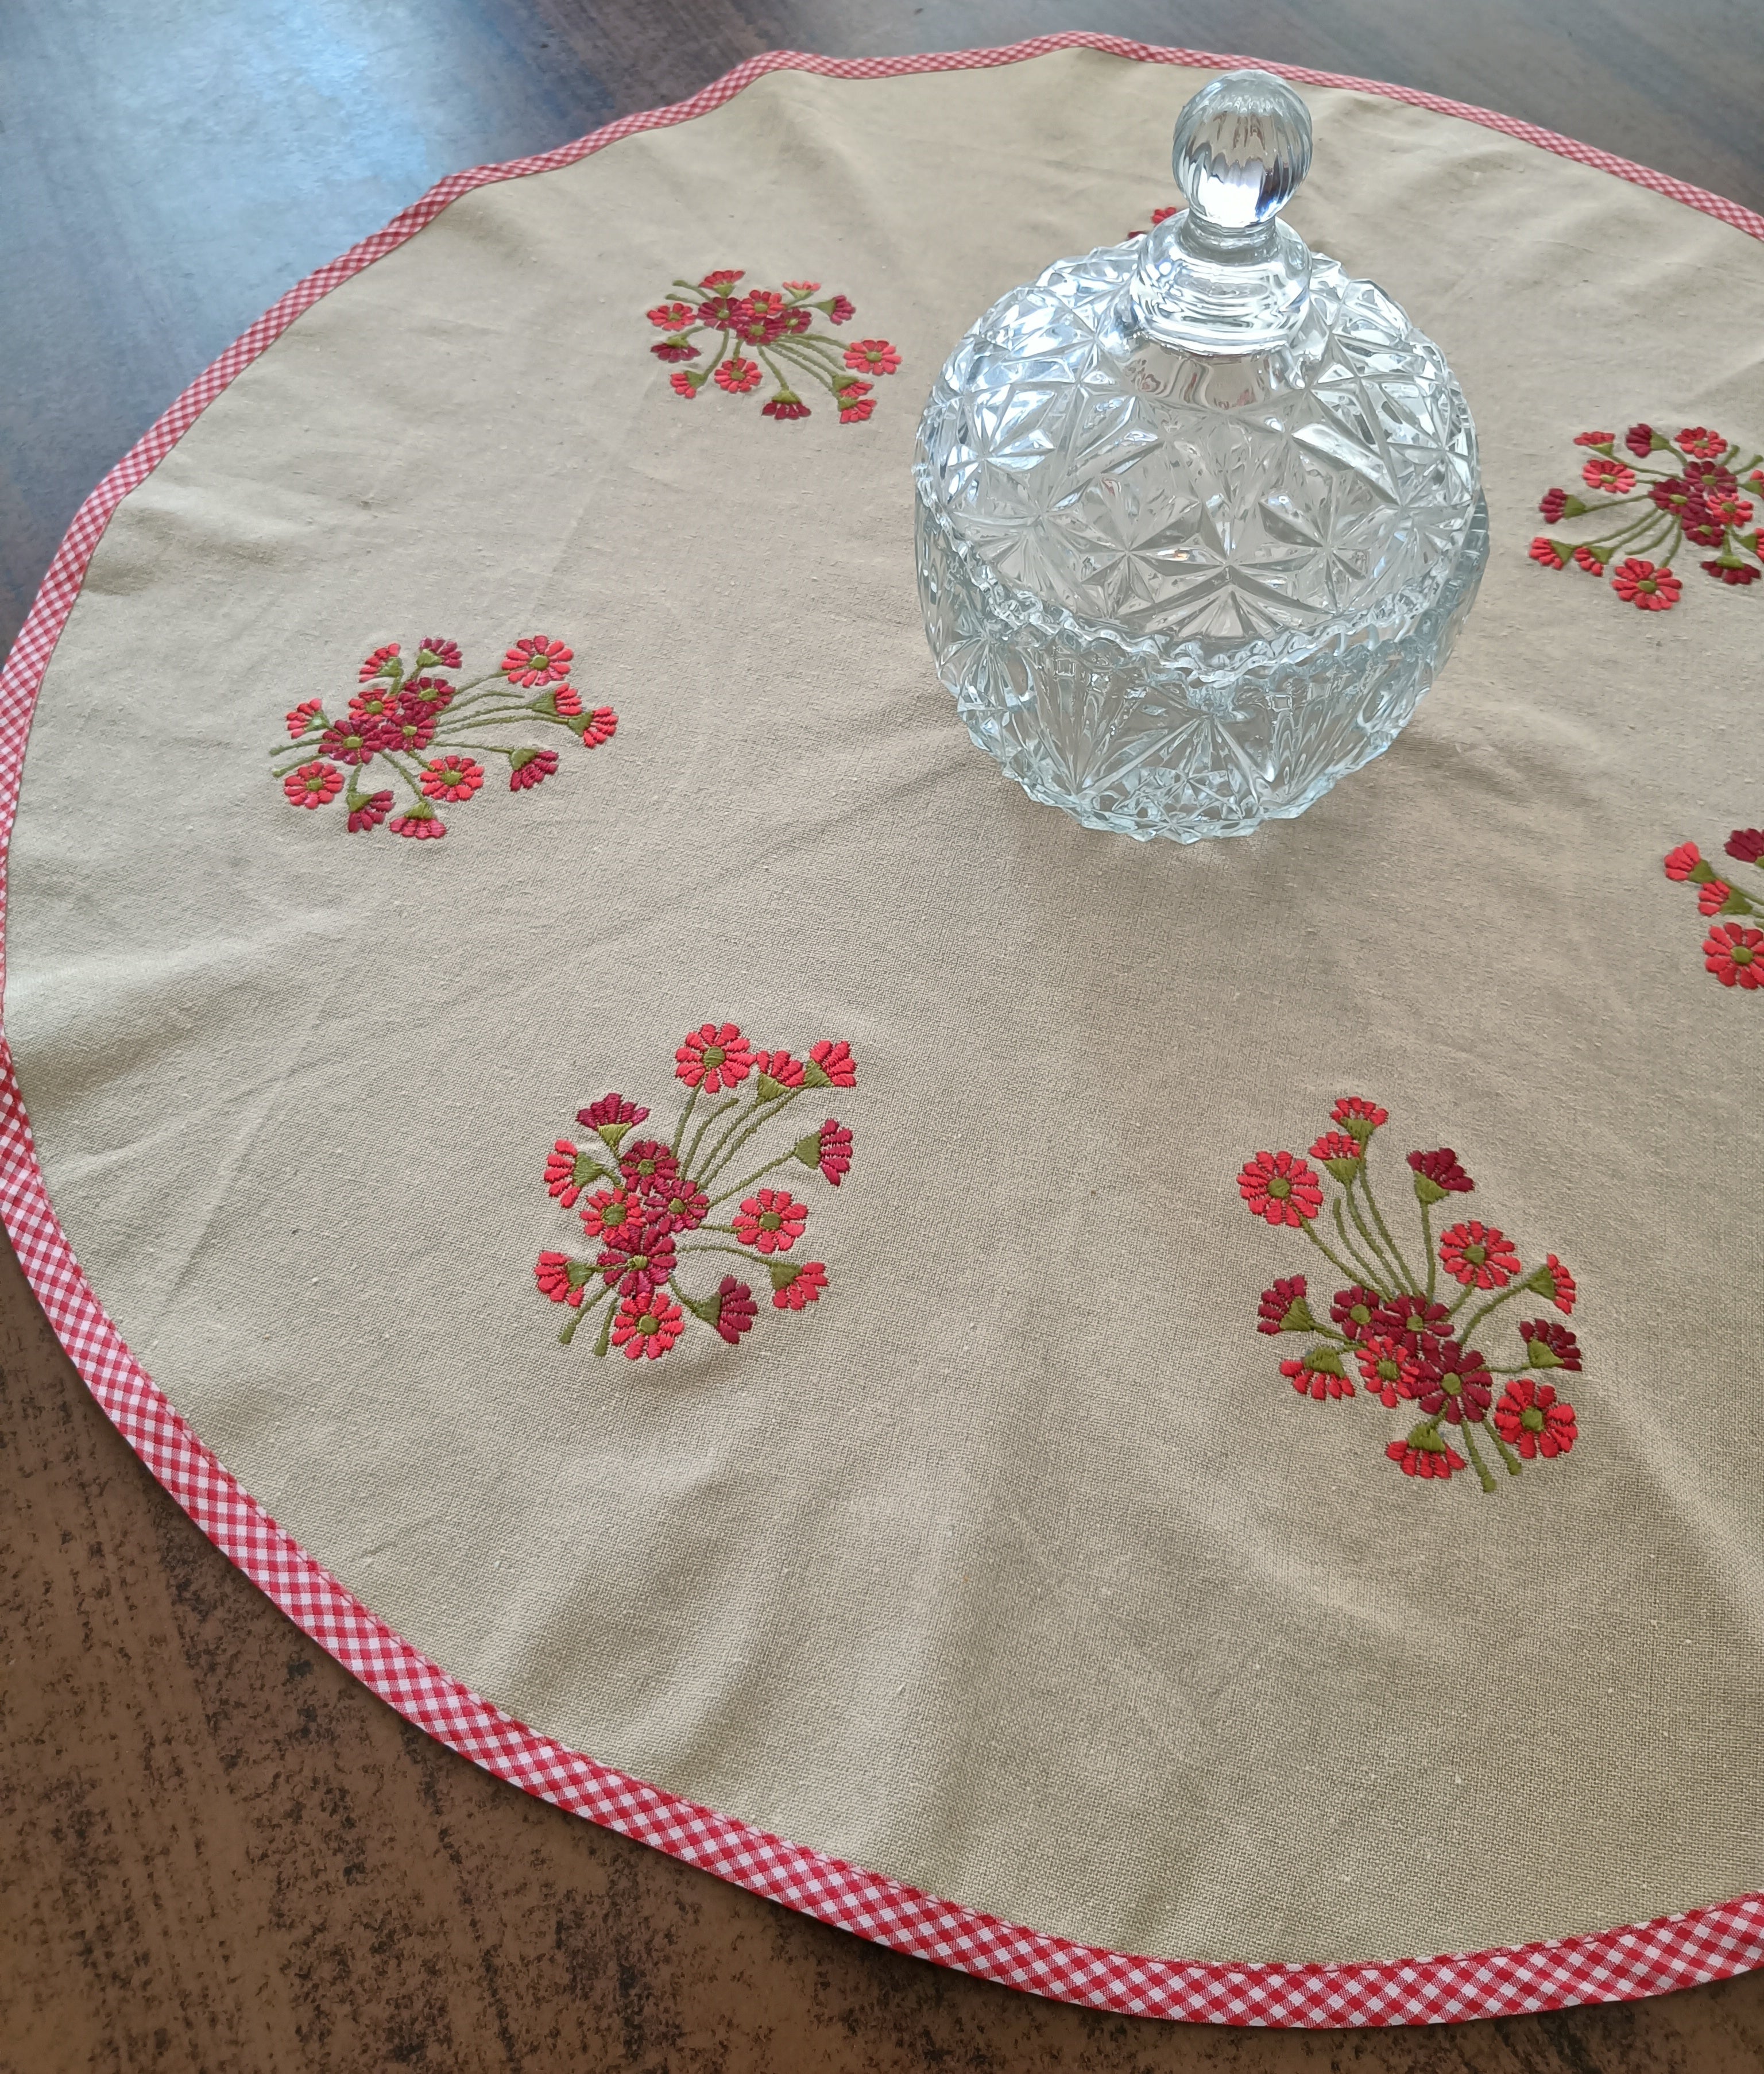 Red & Beige round tablecloth with floral embroidery (Pre-Order)